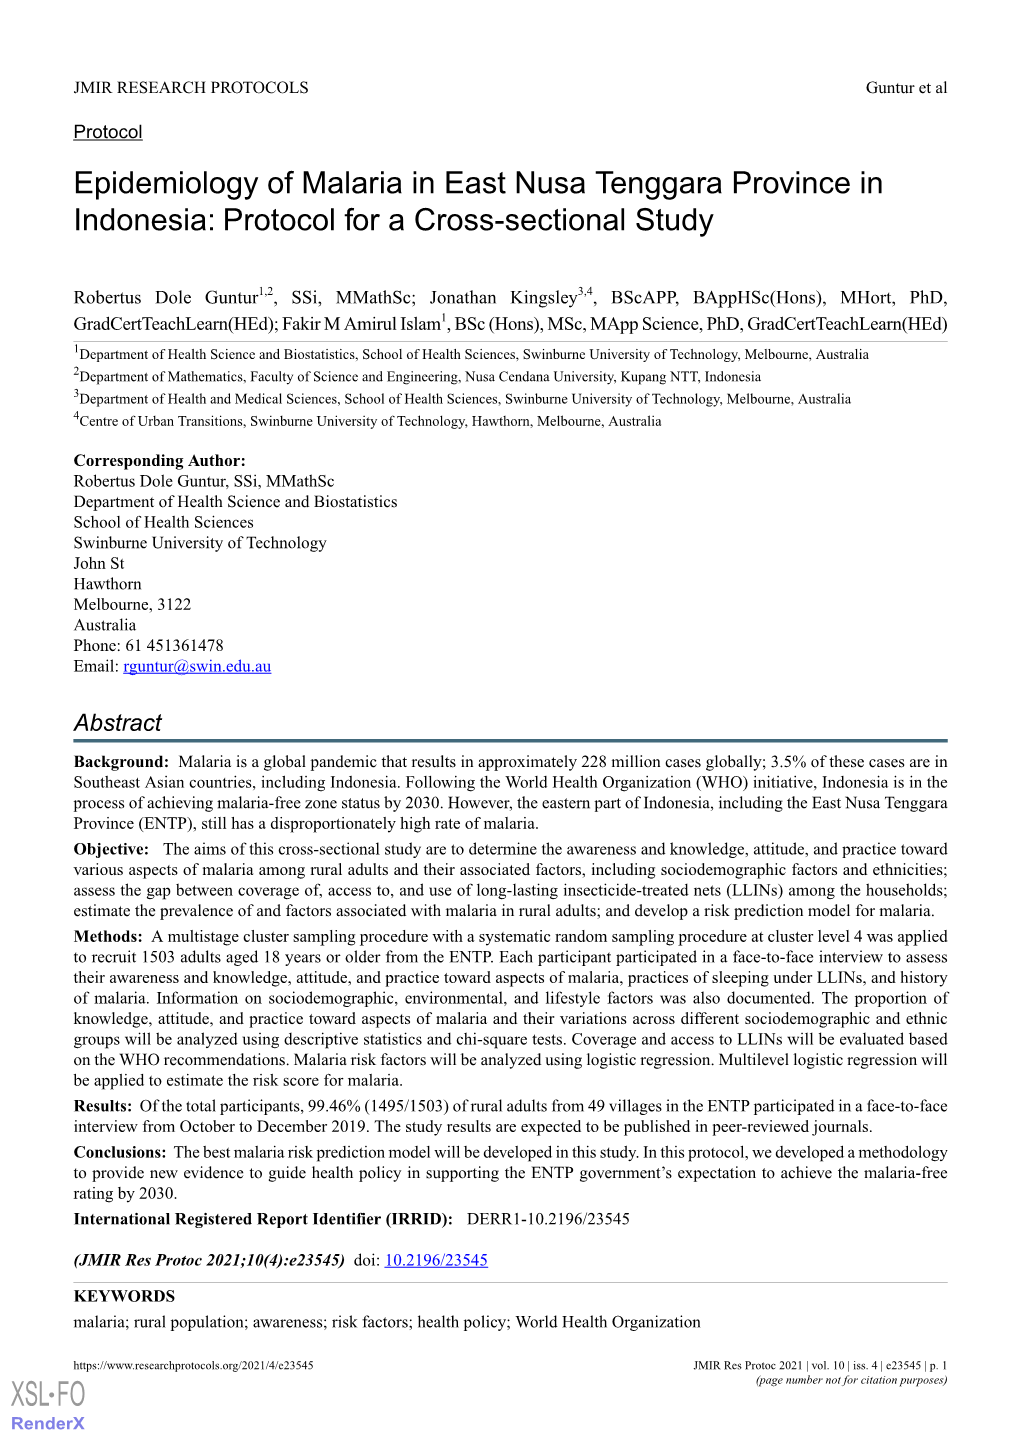 Epidemiology of Malaria in East Nusa Tenggara Province in Indonesia: Protocol for a Cross-Sectional Study